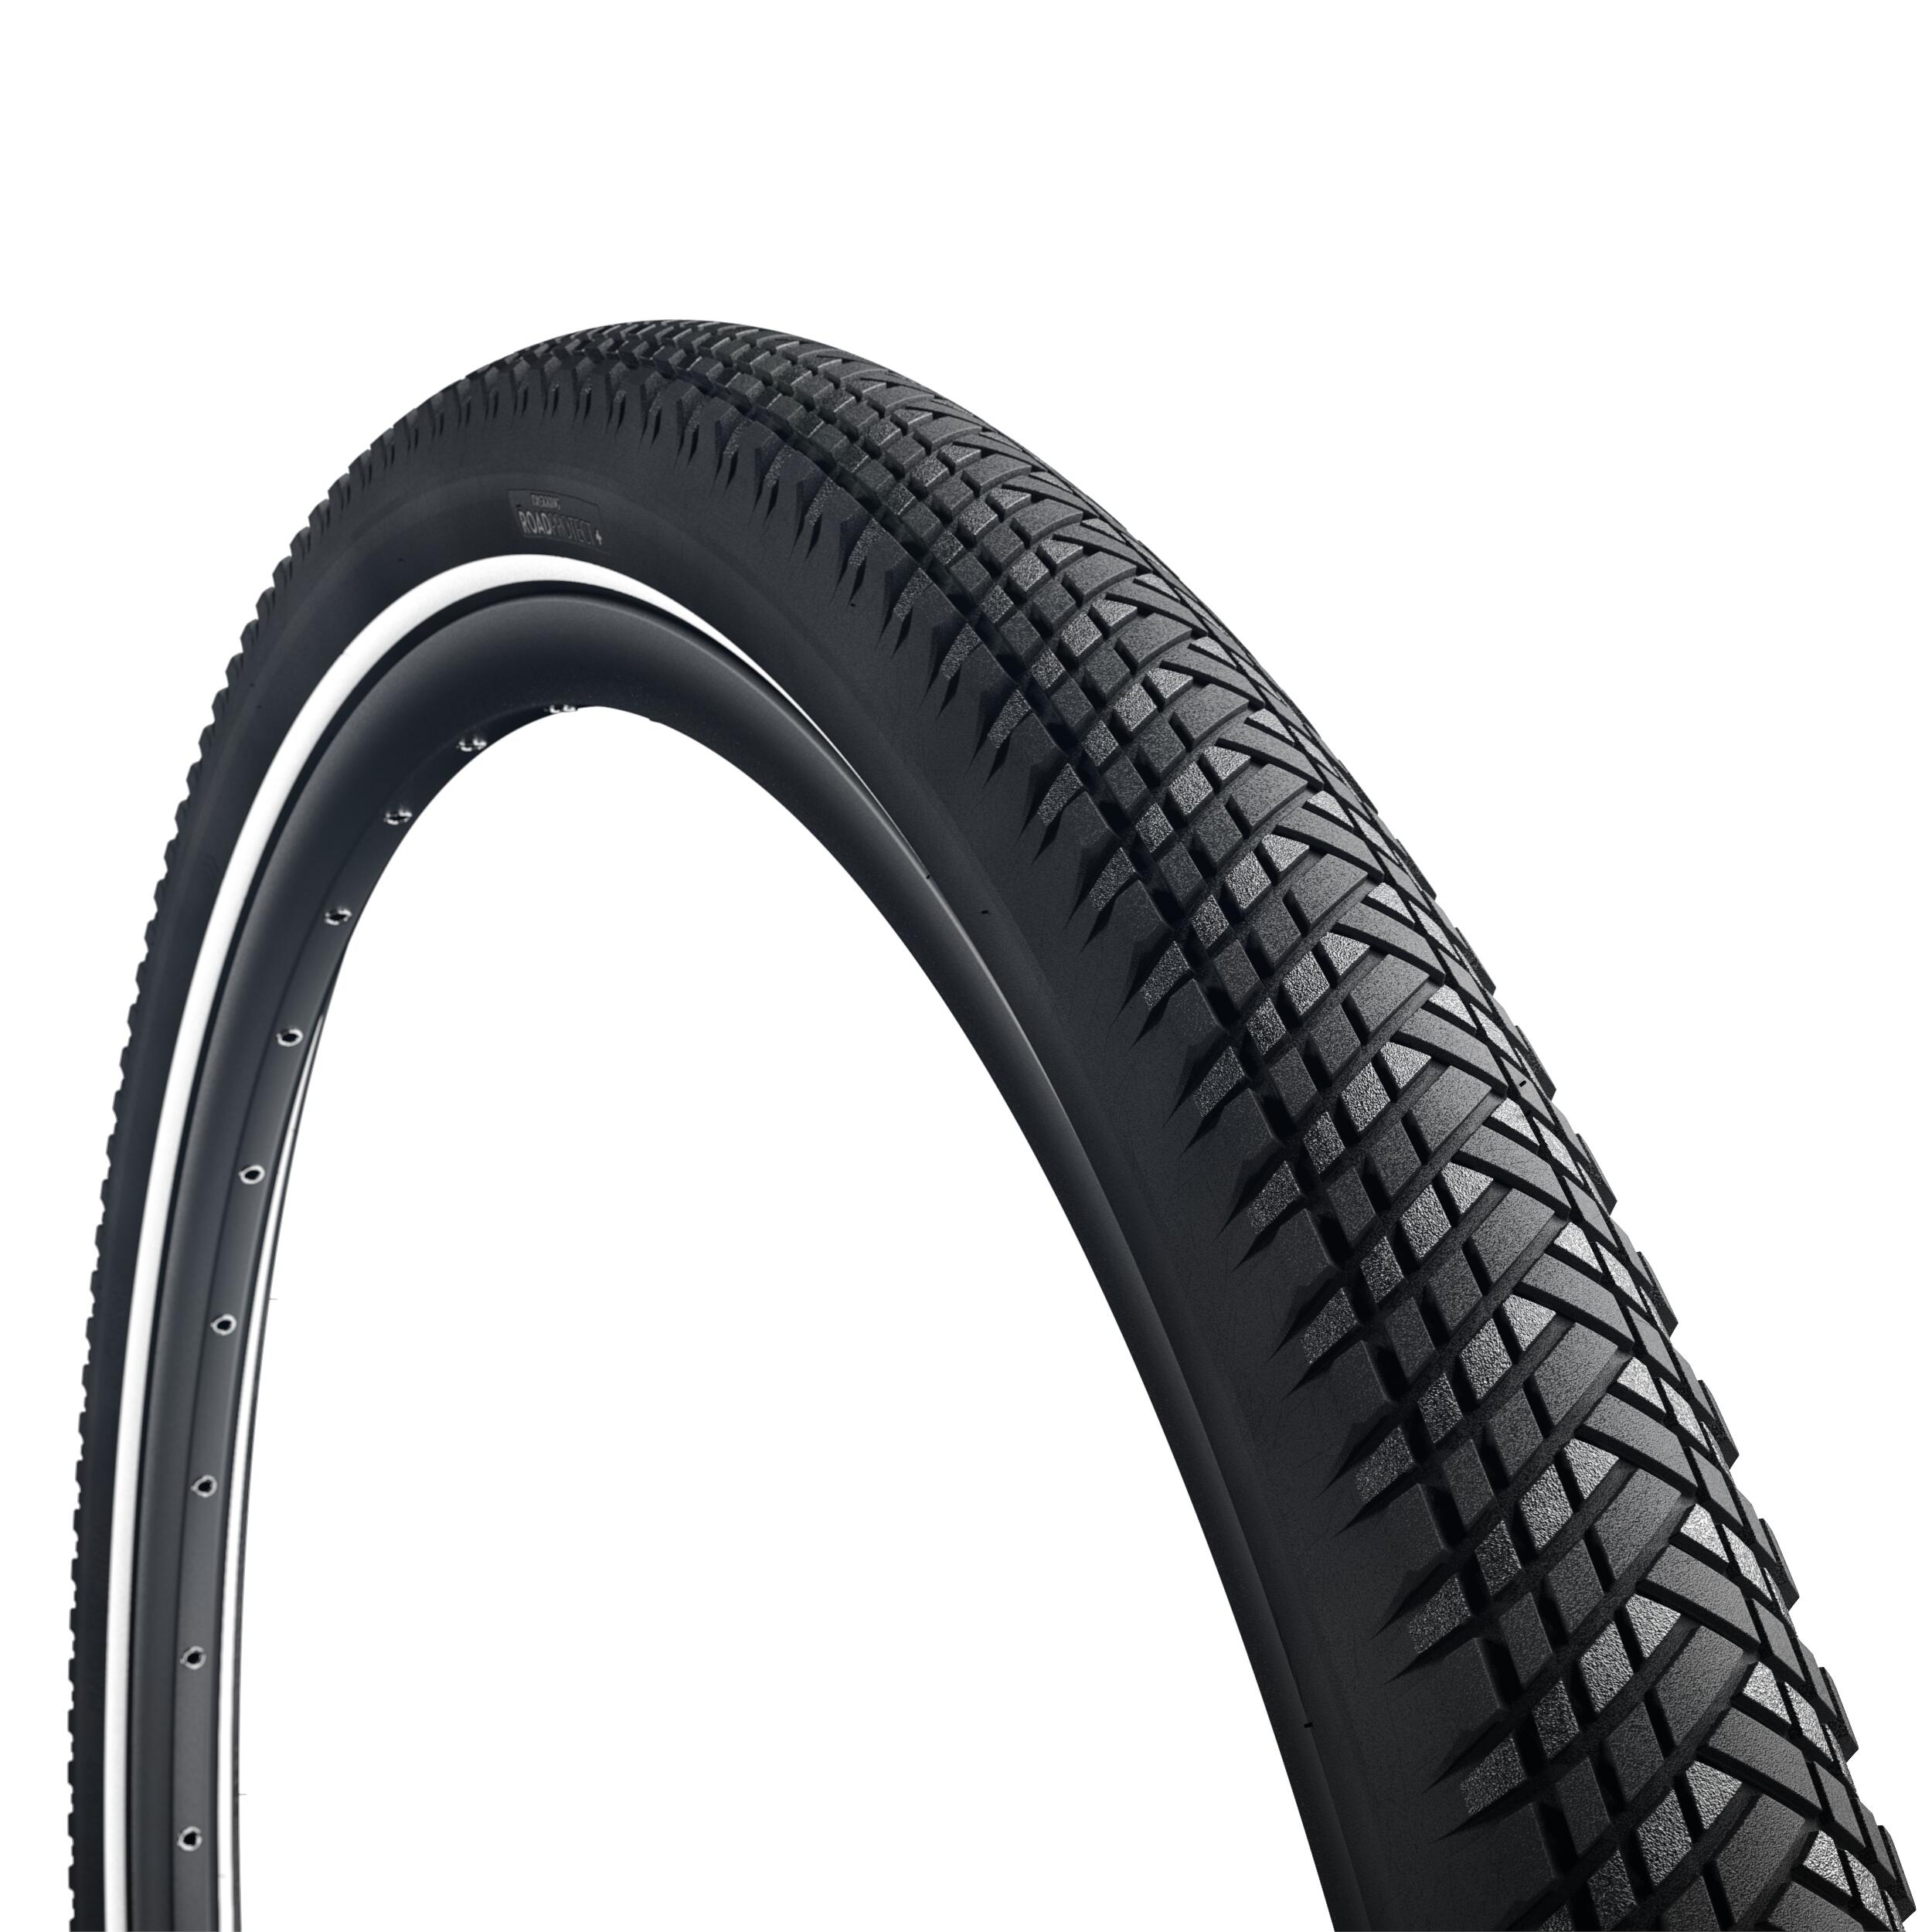 RIVERSIDE Hybrid Electric Bike Puncture-Resistant Tyre RoadProtect+ 26" x 1.85"